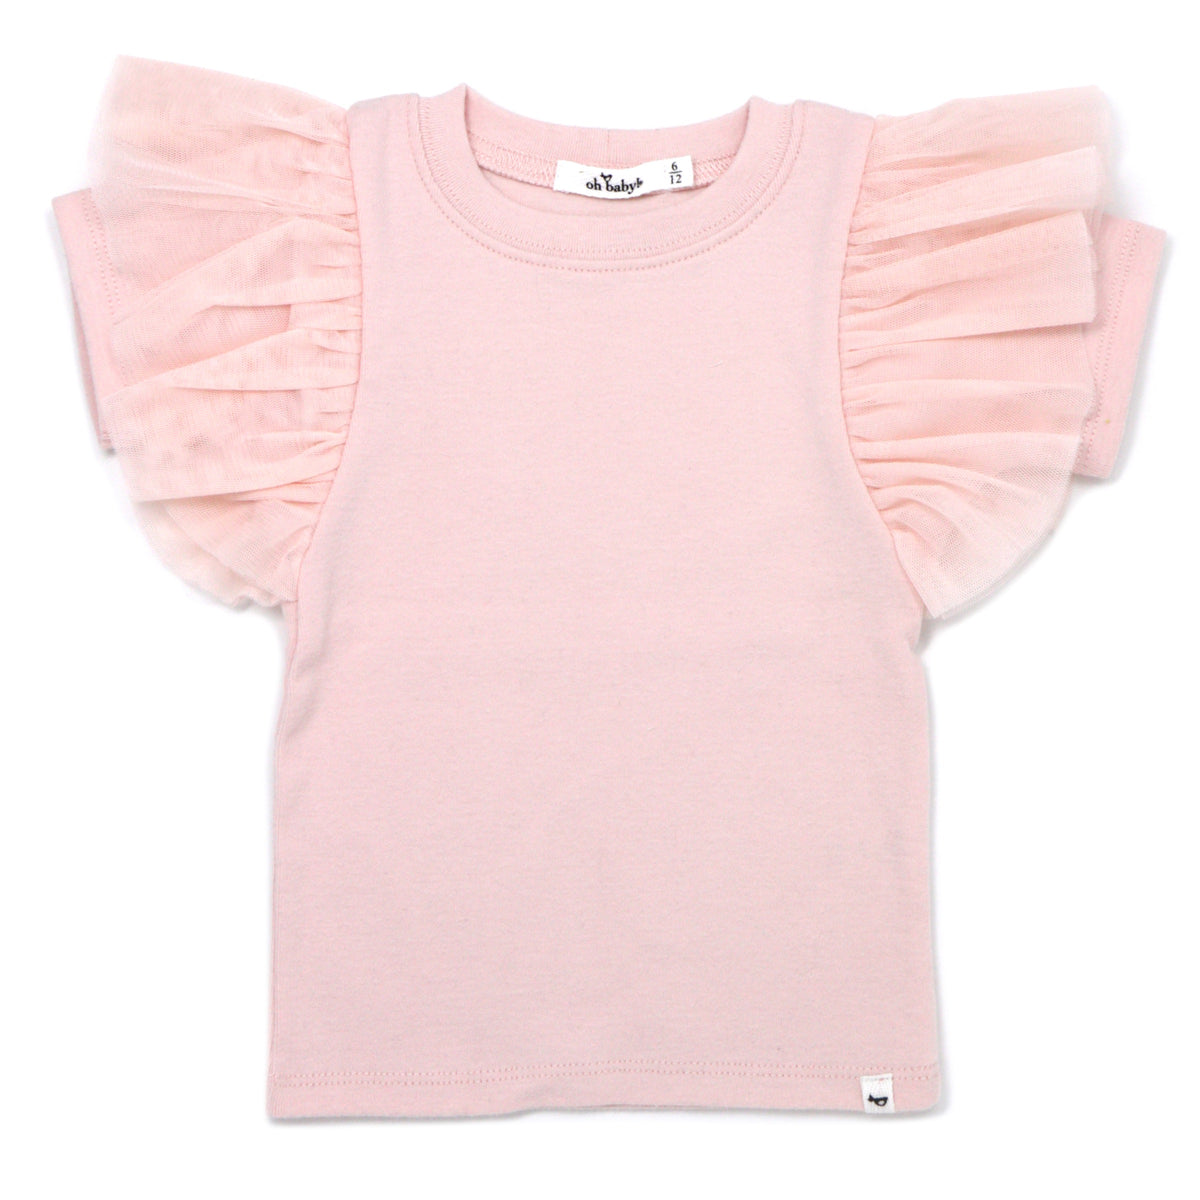 oh baby! Butterfly Sleeve Short Sleeve Tee with Mesh - Pale Pink